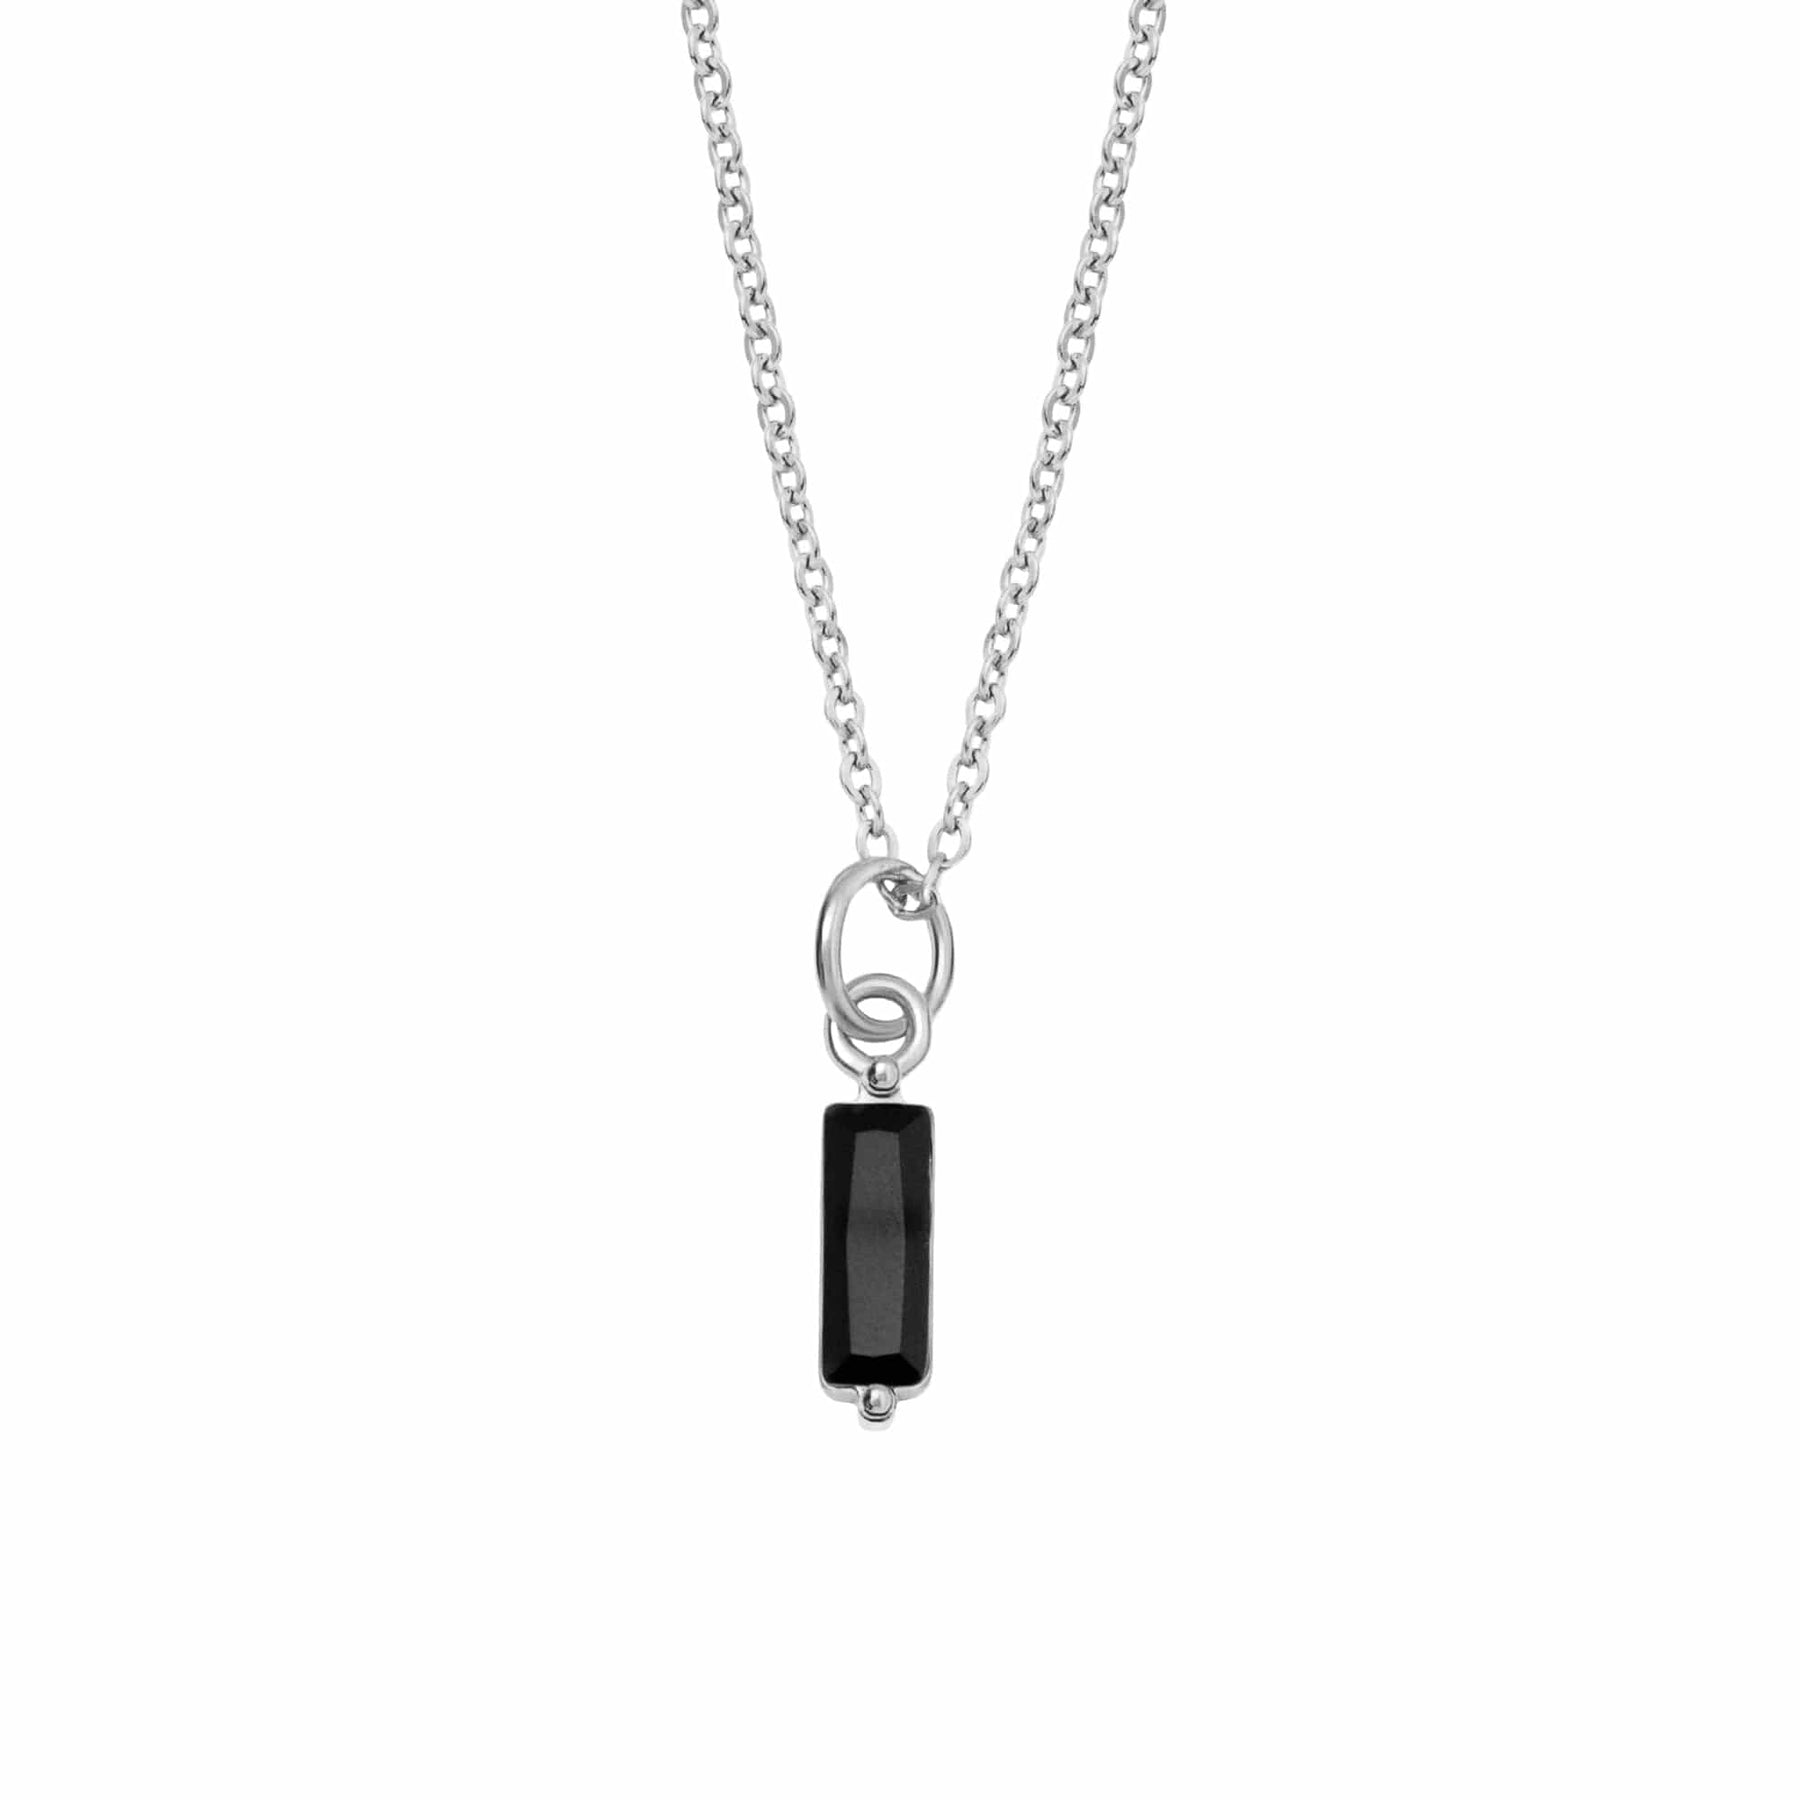 BohoMoon Stainless Steel Onyx Necklace Silver